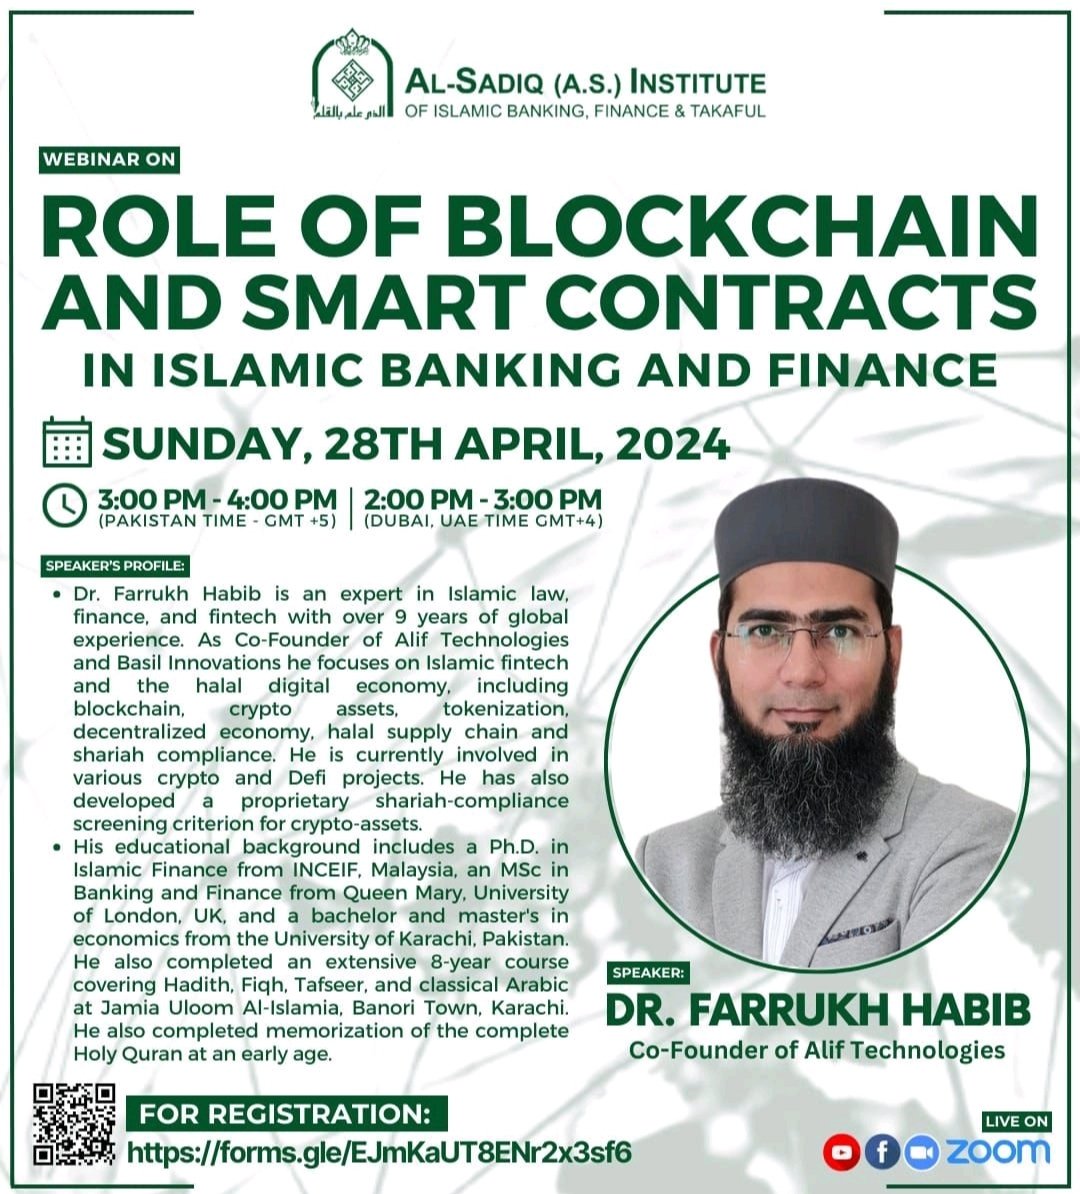 Event: Role of Blockchain and Smart Contracts in Islamic Banking and Finance with @DrFarrukhHabib

Date: Sunday 28th April 2024
Time: 6pm 🇲🇾, 3pm 🇵🇰, 2pm 🇦🇪, 11am 🇬🇧

Register here: docs.google.com/forms/d/e/1FAI…

#Islamicfintech